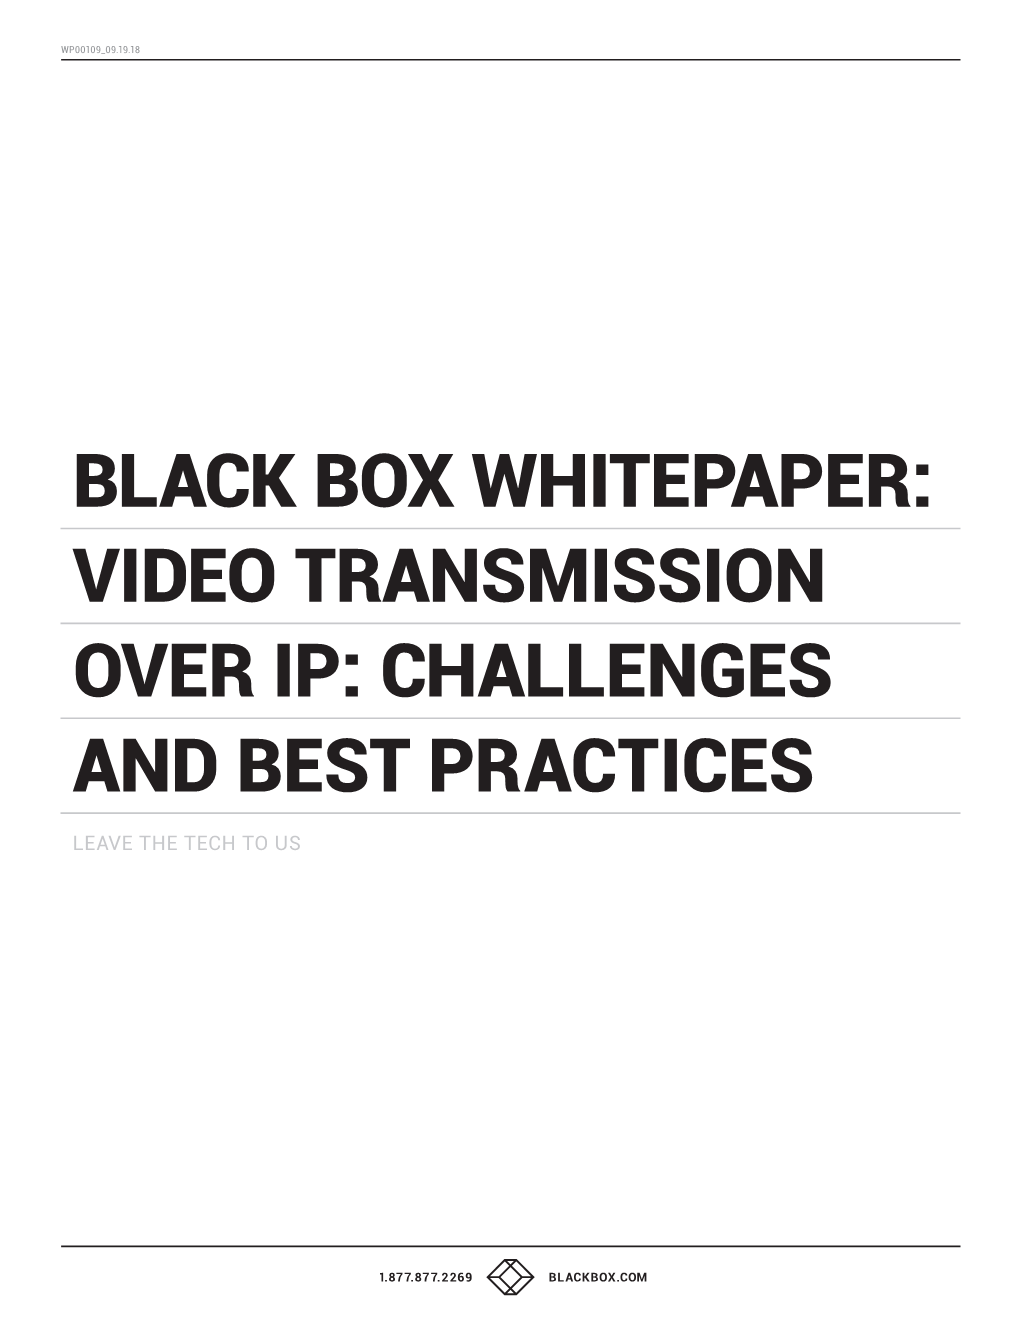 Black Box Whitepaper: Video Transmission Over Ip: Challenges and Best Practices